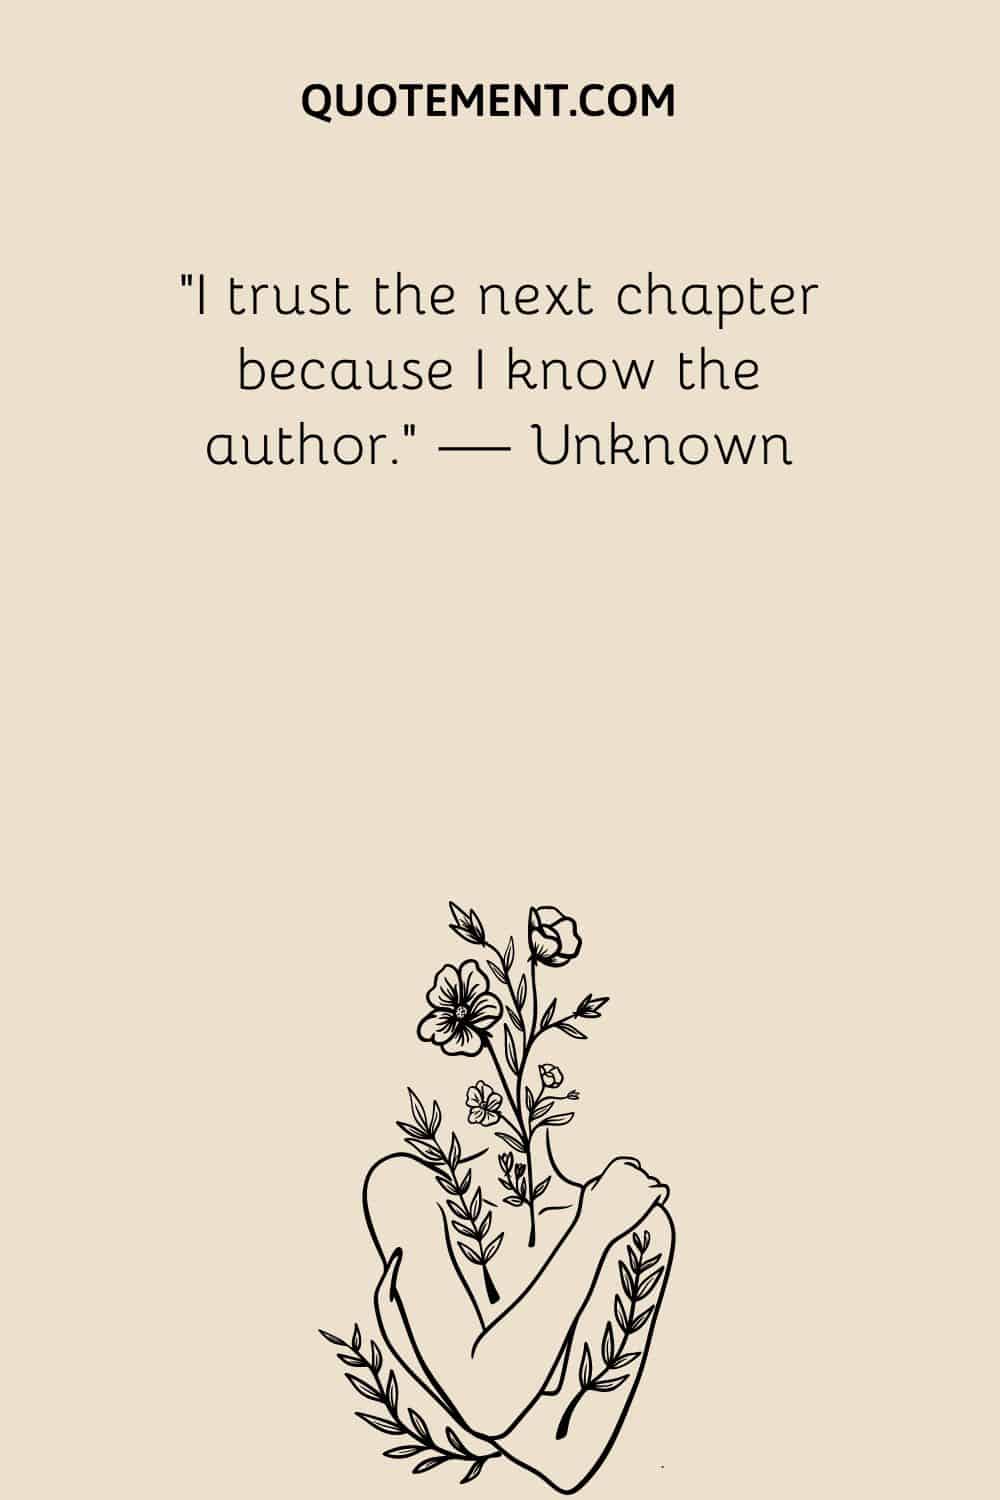 I trust the next chapter because I know the author